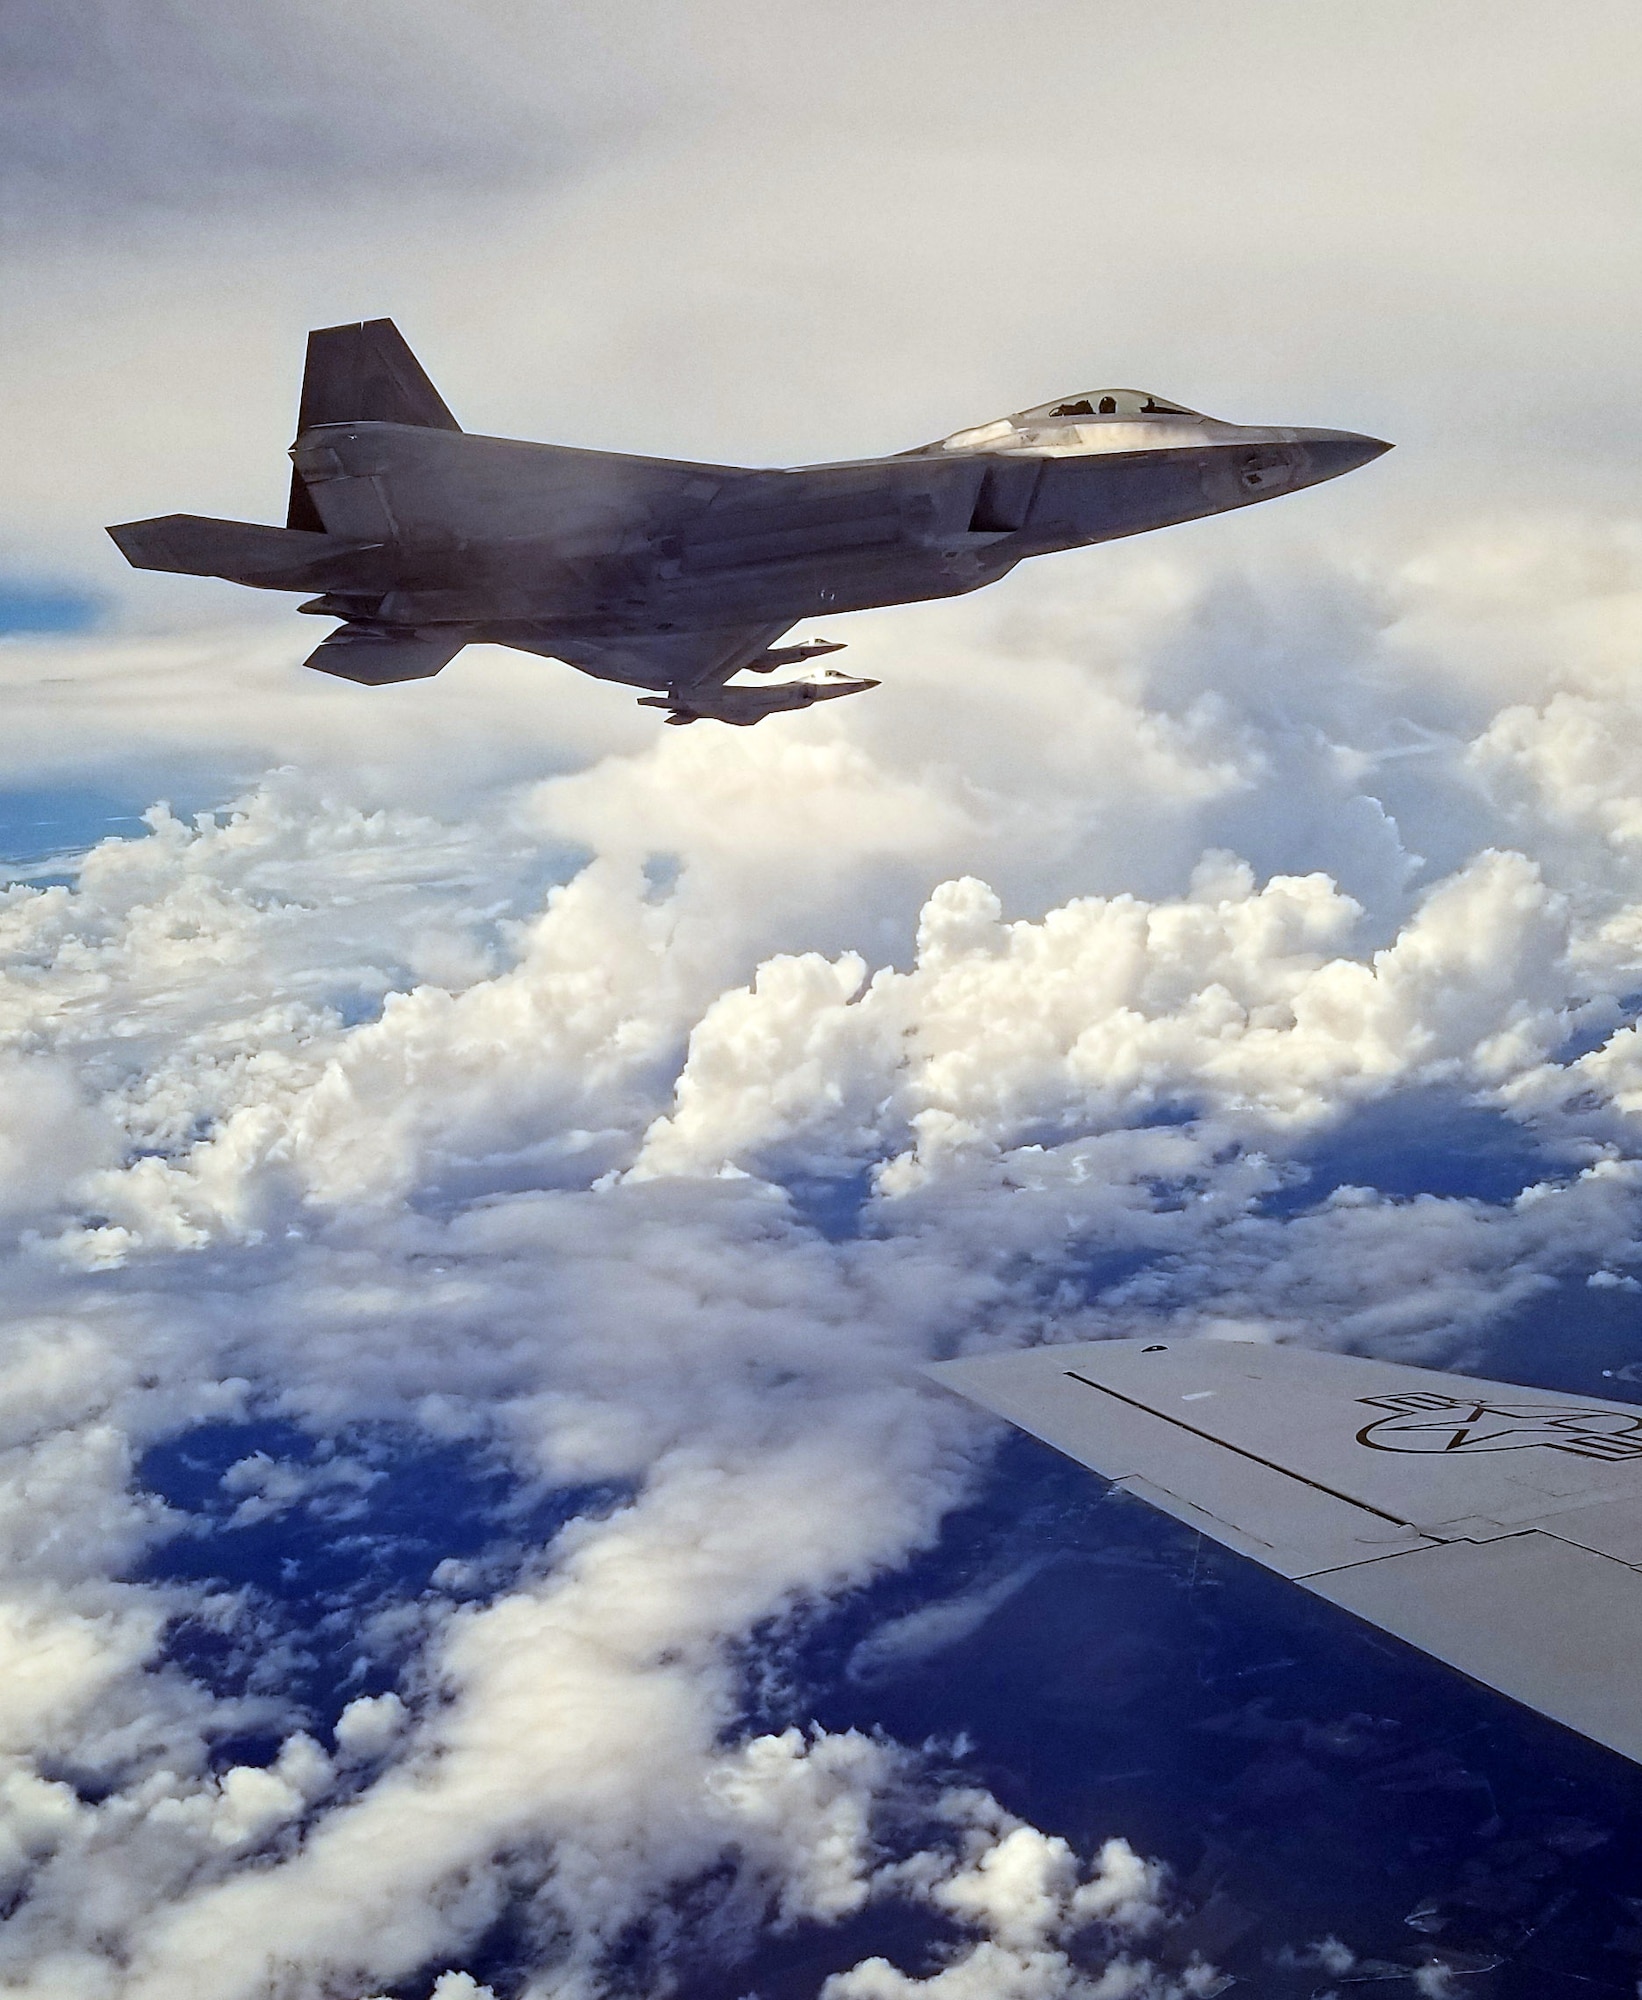 U.S. Air Force F-22 Raptors from the 325th Fighter Wing, Tyndall Air Force Base, Florida, fly alongside a KC-135 Stratotanker from MacDill Air Force Base during a Civic Leader Tour’s refueling demonstration over the Gulf of Mexico, May 21, 2018. F-22 pilots have to complete the F-22 Raptor Basic Course at Tyndall to be qualified to fly the fifth generation aircraft. The B-Course entails emergency procedures, instrument tasks, and day and night air-to-air refueling. The students are also educated on air-to-air employment, air-to-ground employment, basic low altitude employment and night-vision goggle and night employment. (U.S. Air Force photo by Airman 1st Class Isaiah J. Soliz)